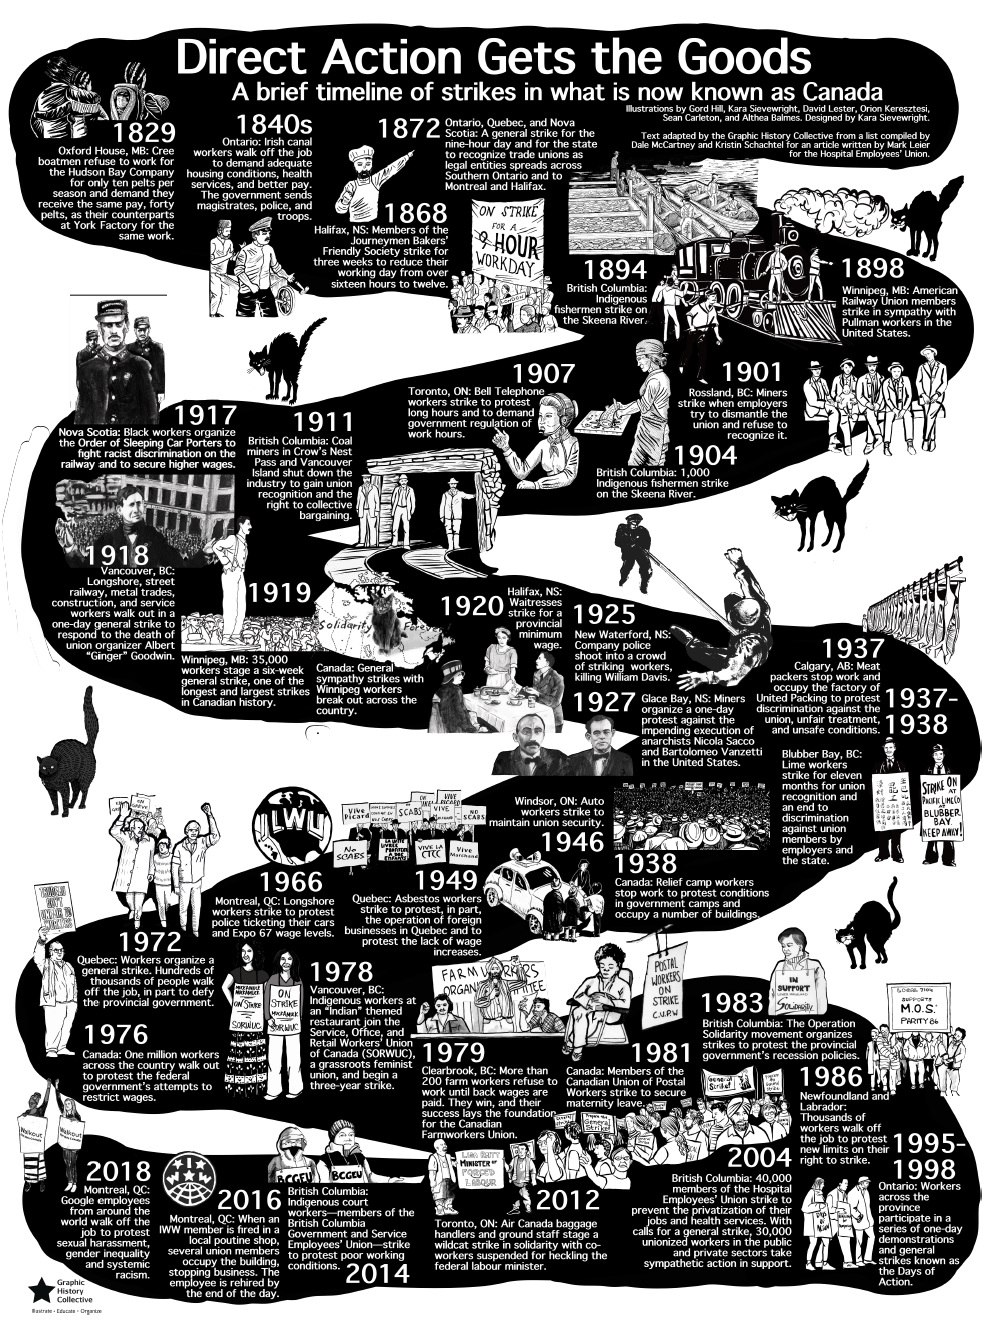 Illustrated timeline of direct action in Canada